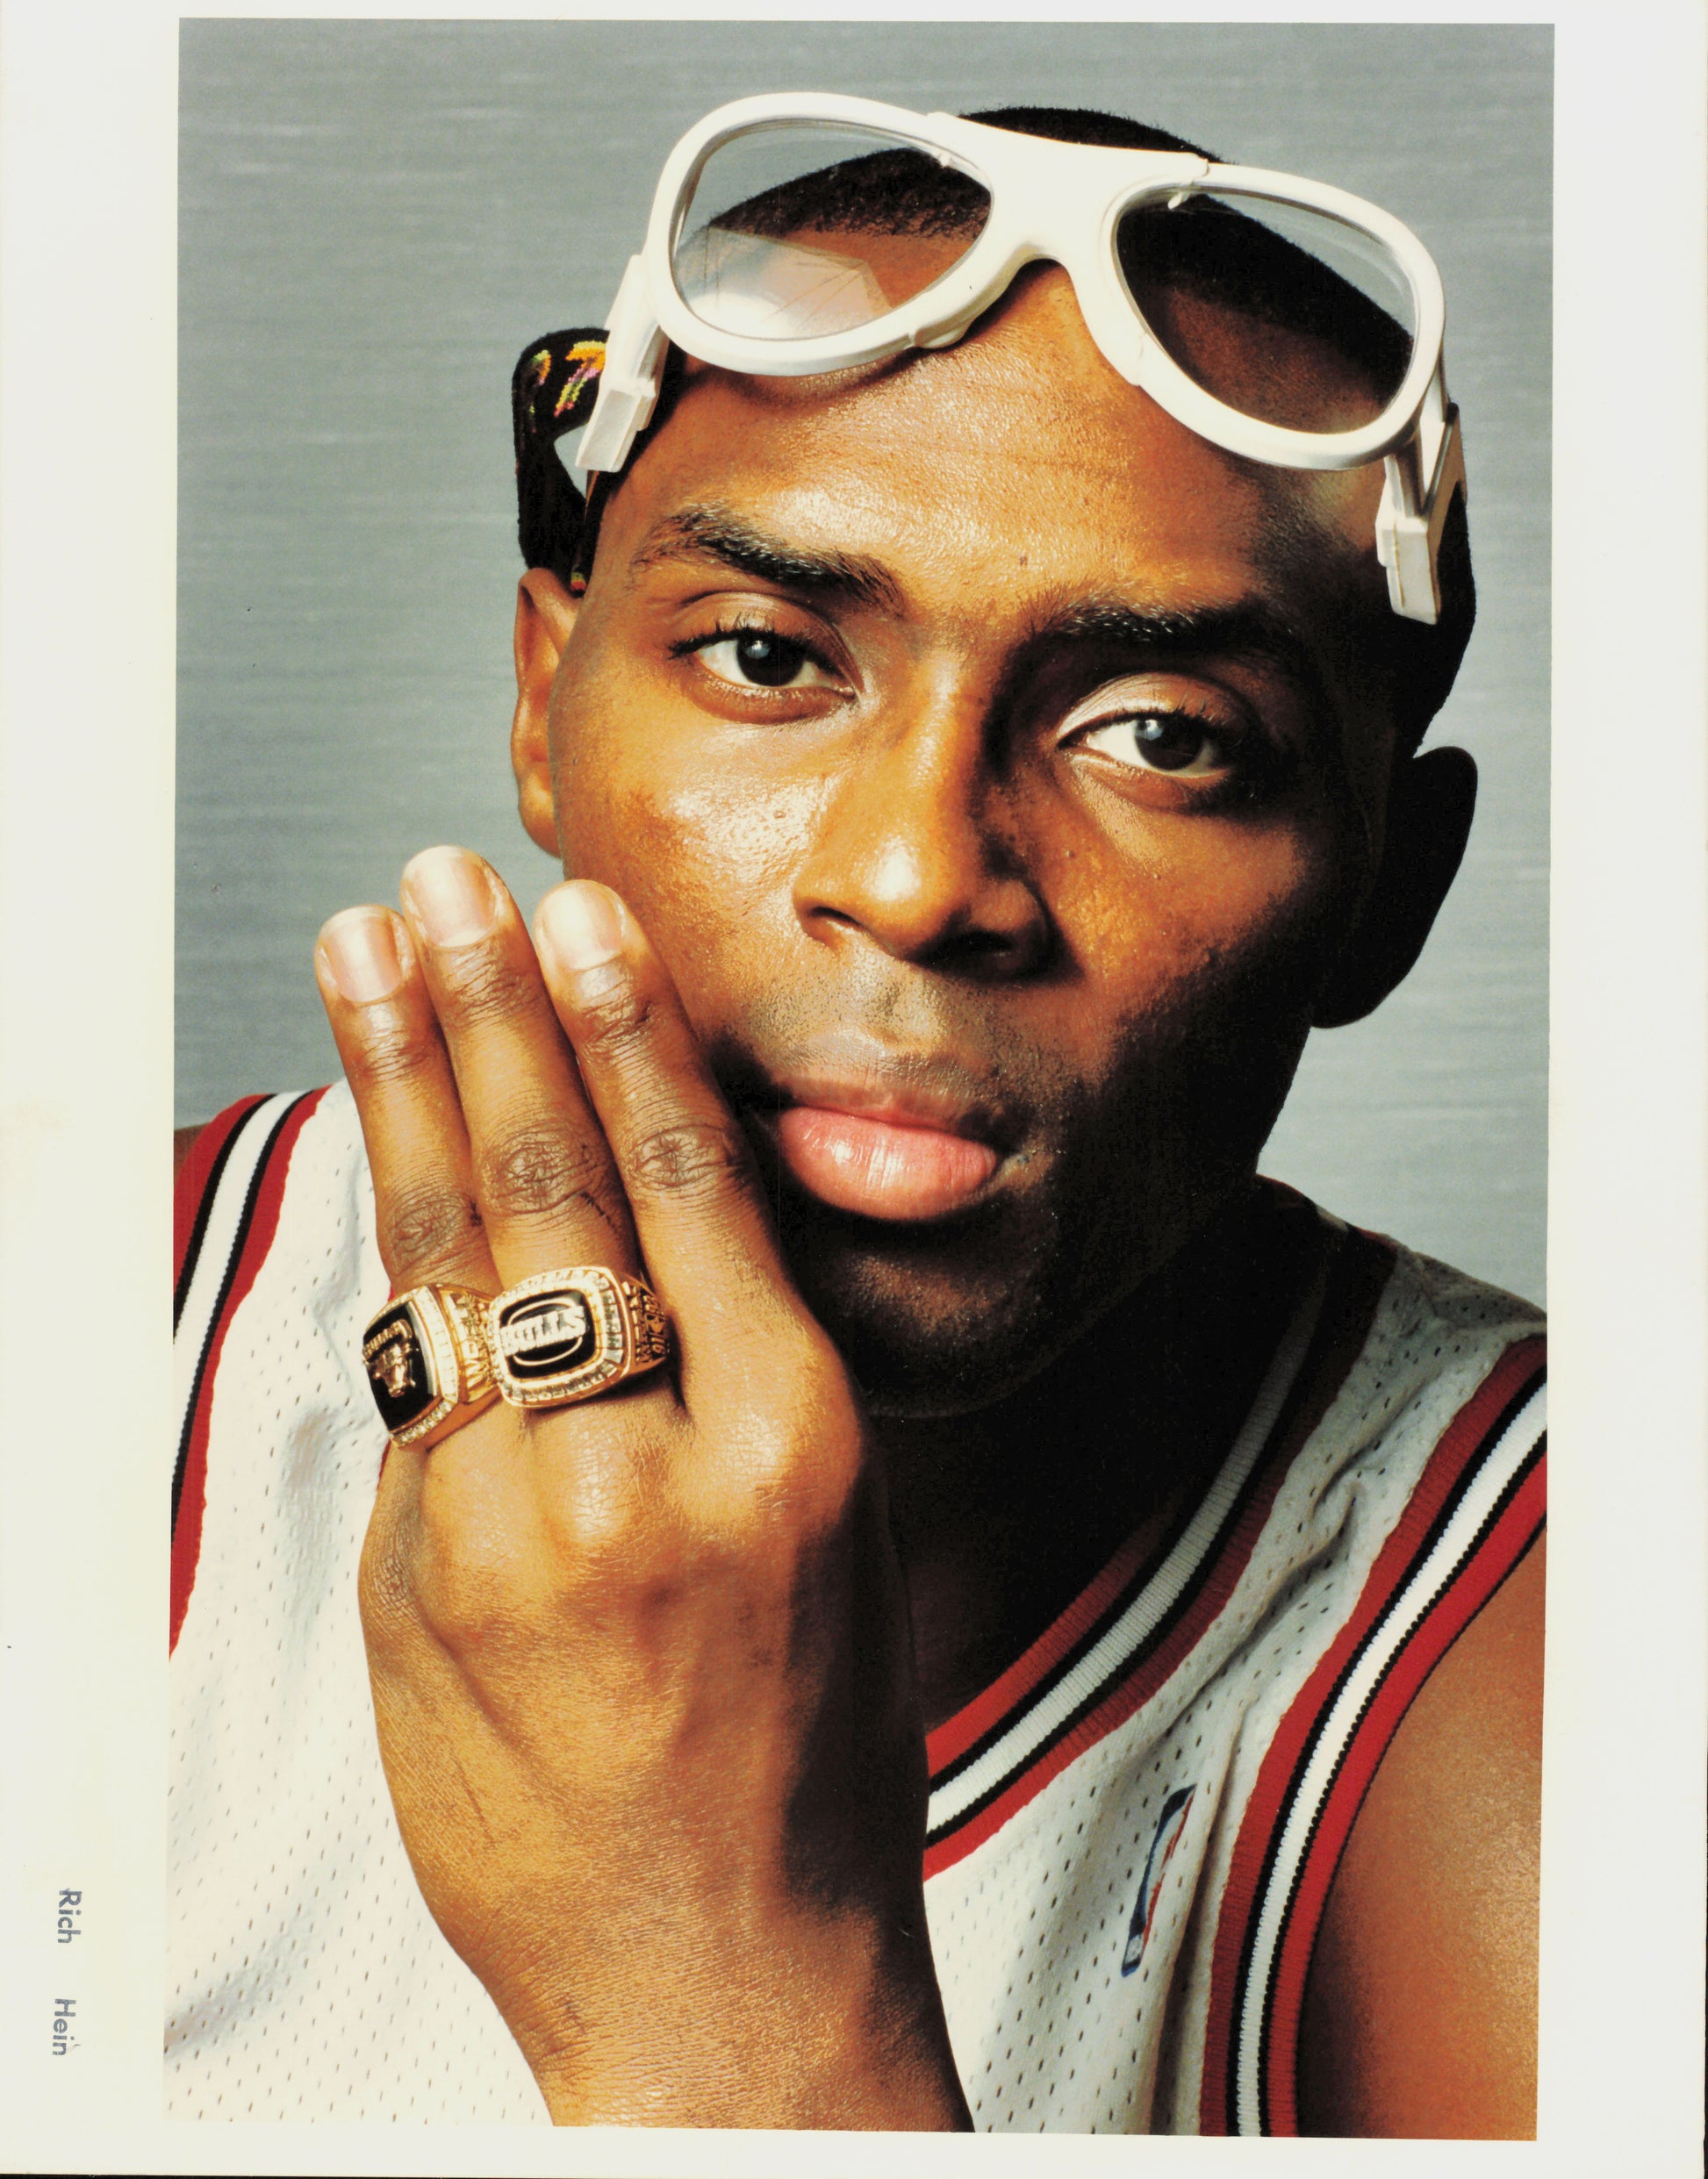 Horace Grant Oversize Collection (1993) (3 Vintage Prints) Basketball Chicago Bulls NBA Sports